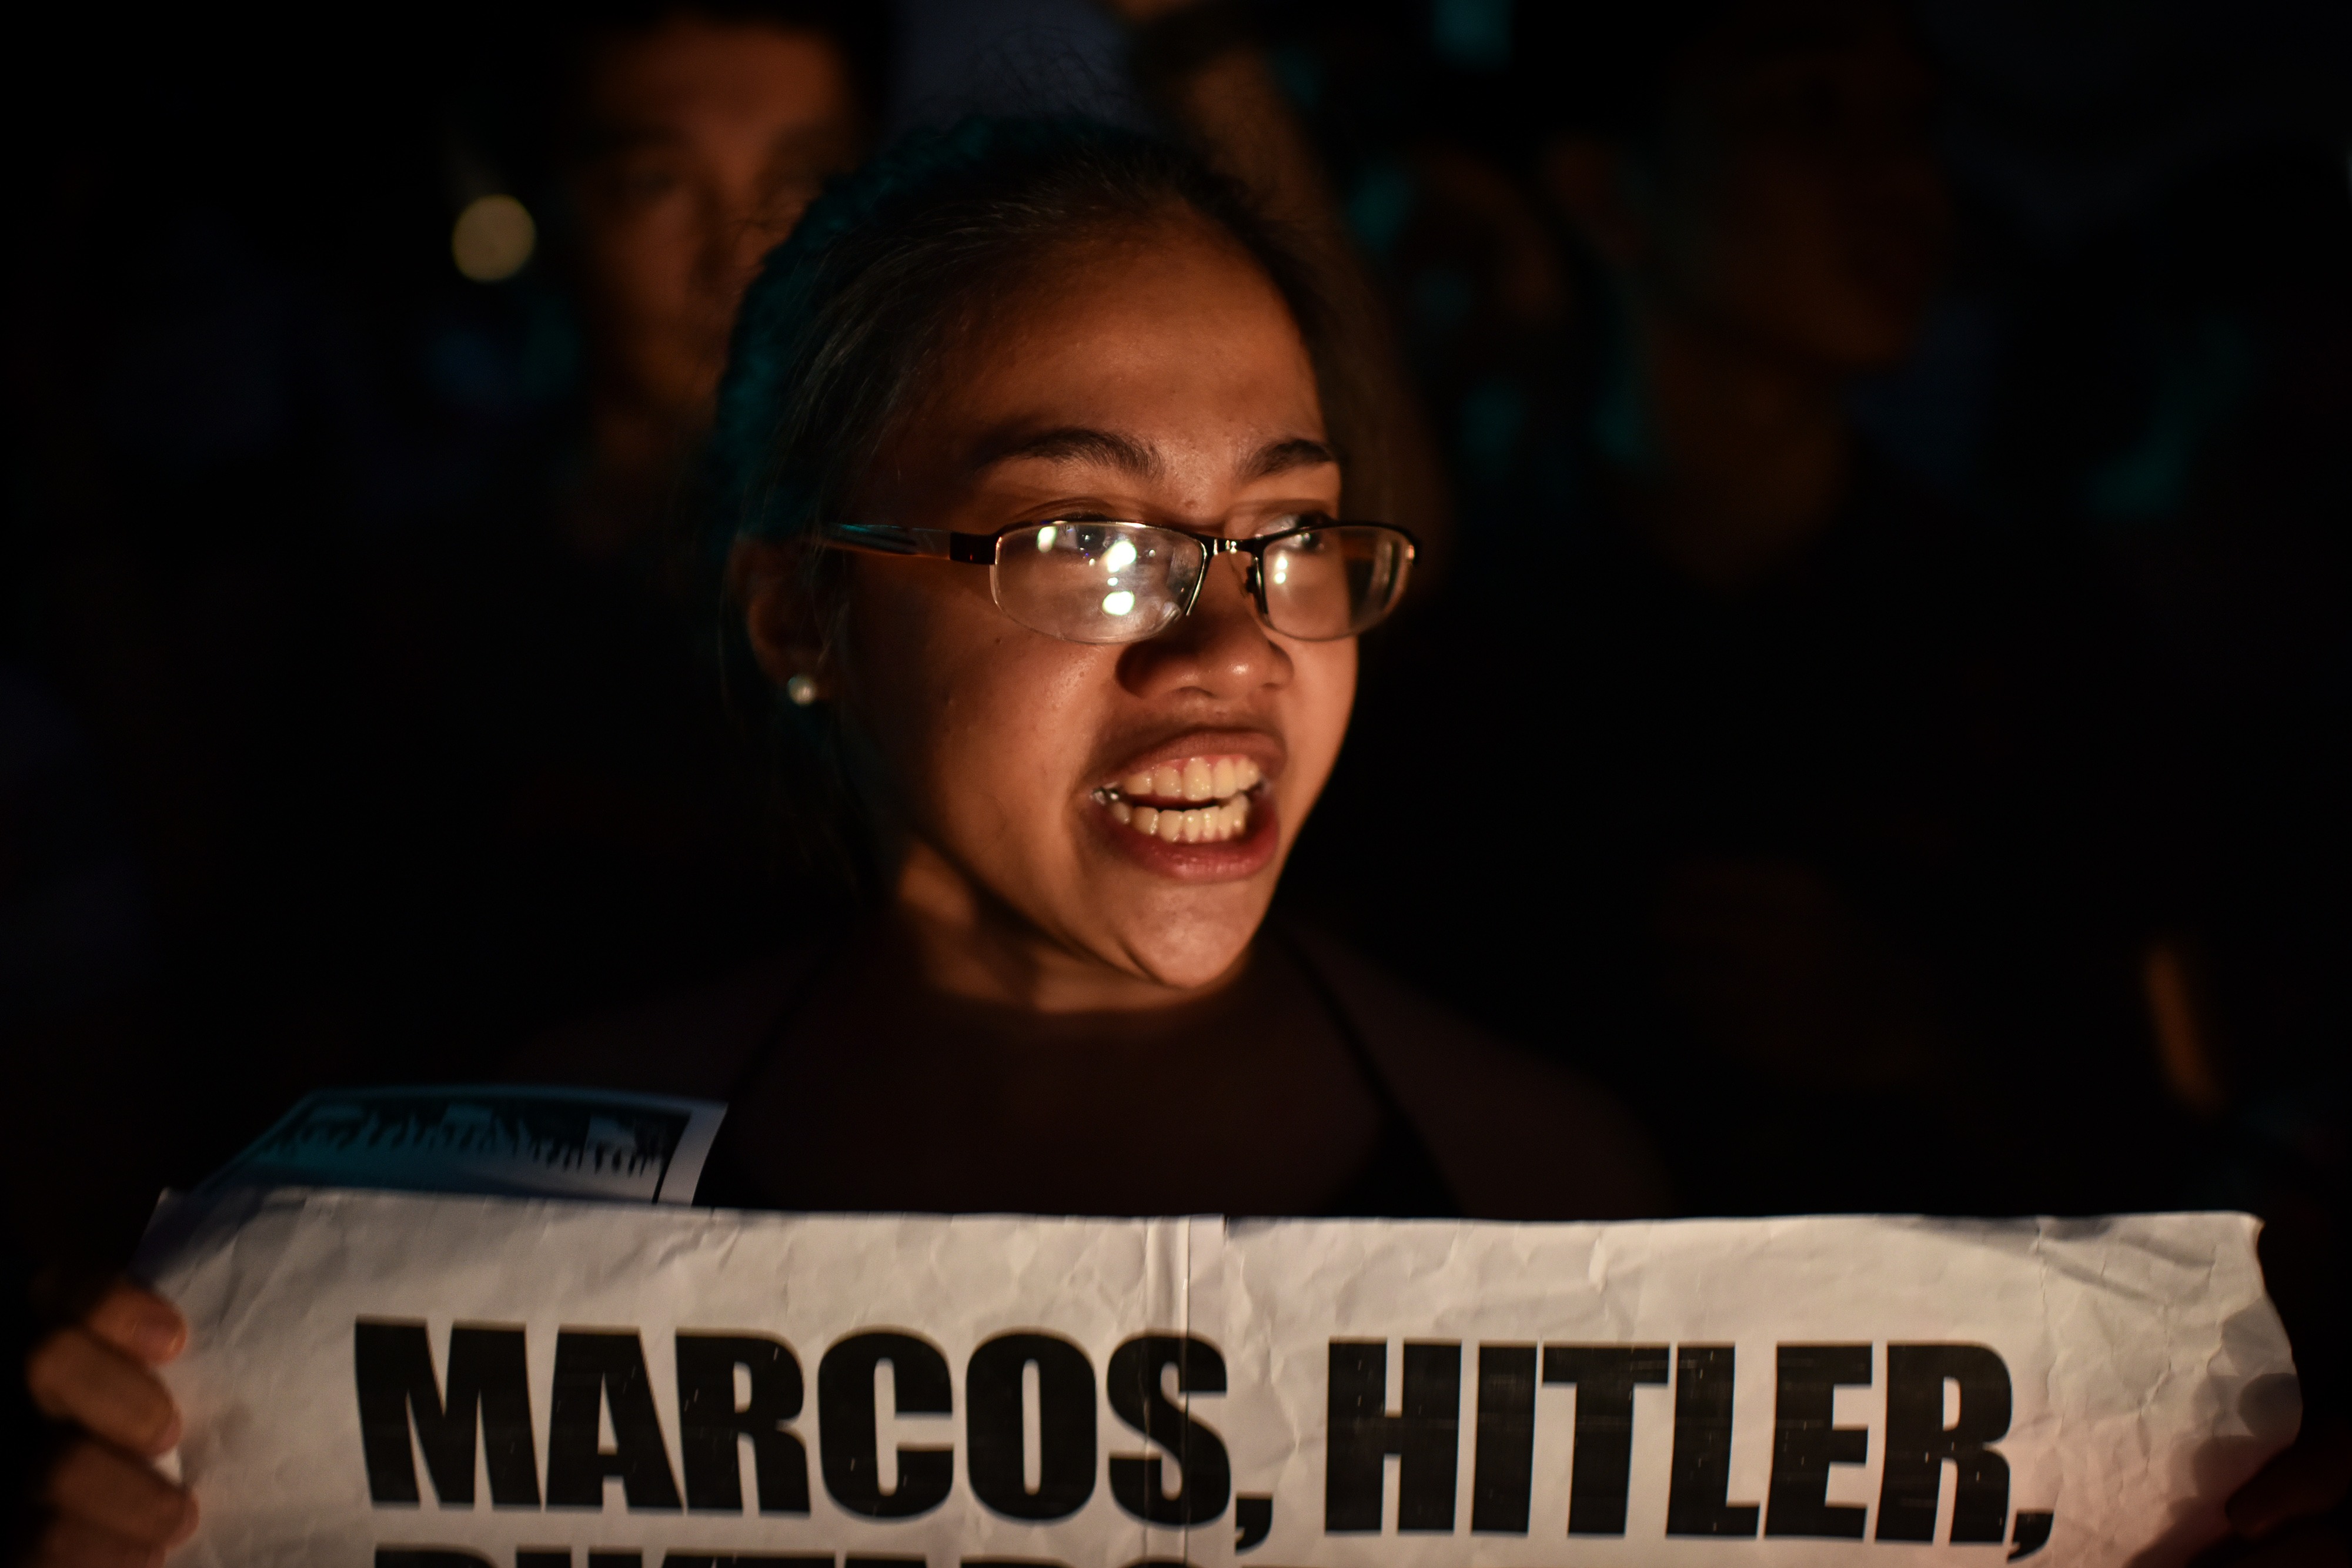 Students and anti-Marcos activists take to the streets of Manila to protest the hero's burial accorded to former Philippine dictator Ferdinand Marcos on Nov. 18, 2016. (Jes Aznar—Getty Images)